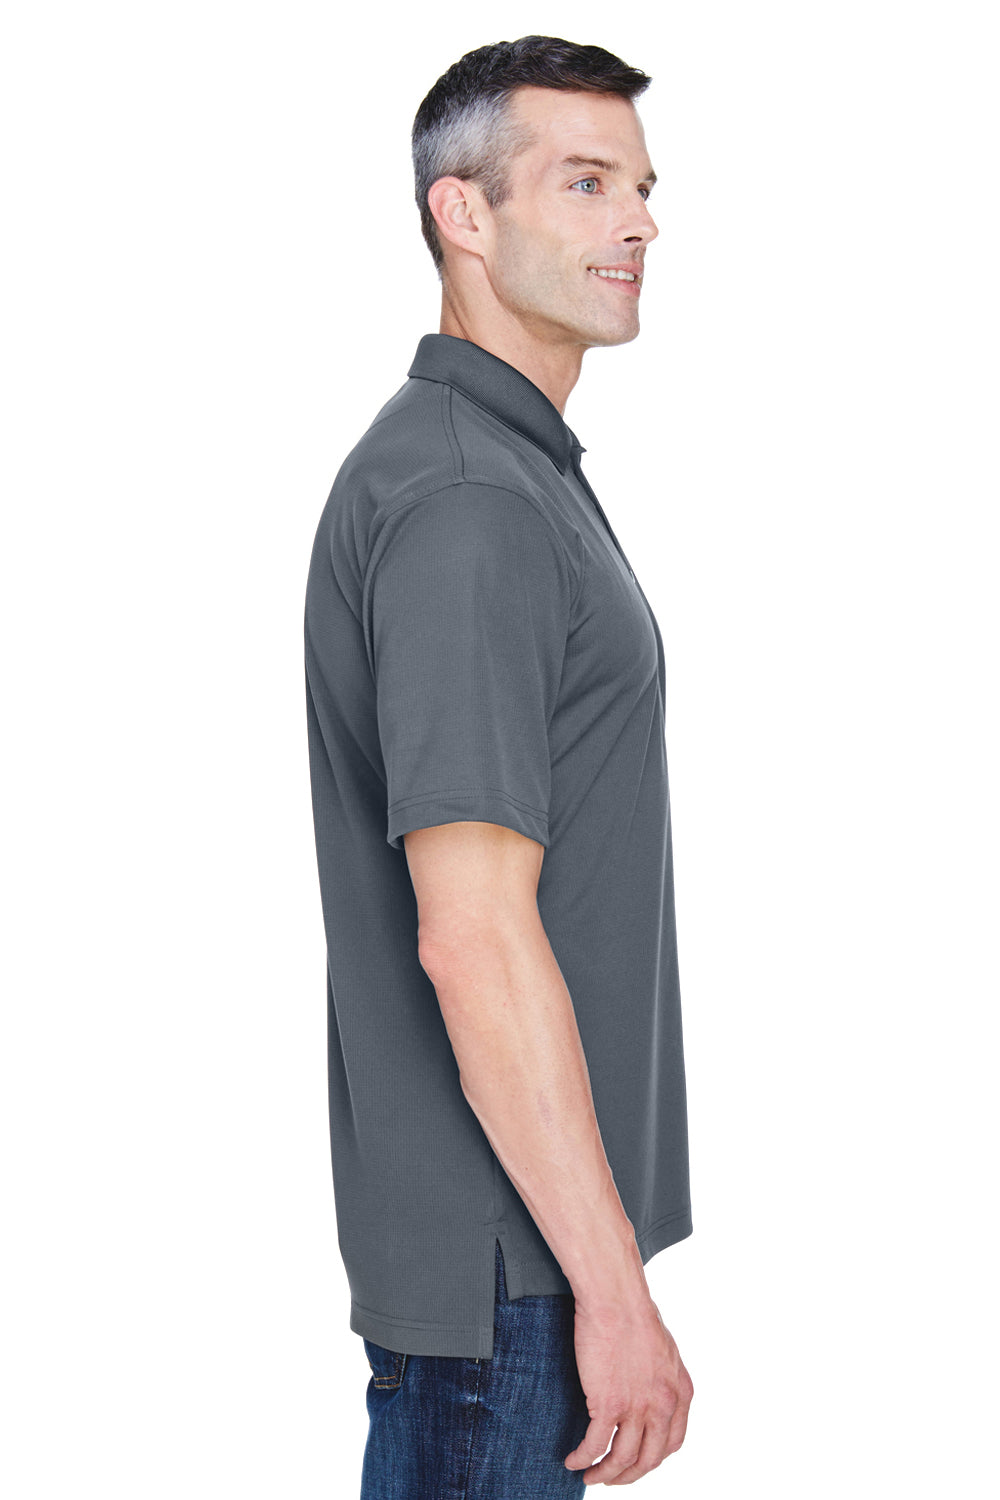 UltraClub 8445 Mens Cool & Dry Performance Moisture Wicking Short Sleeve Polo Shirt Charcoal Grey Side